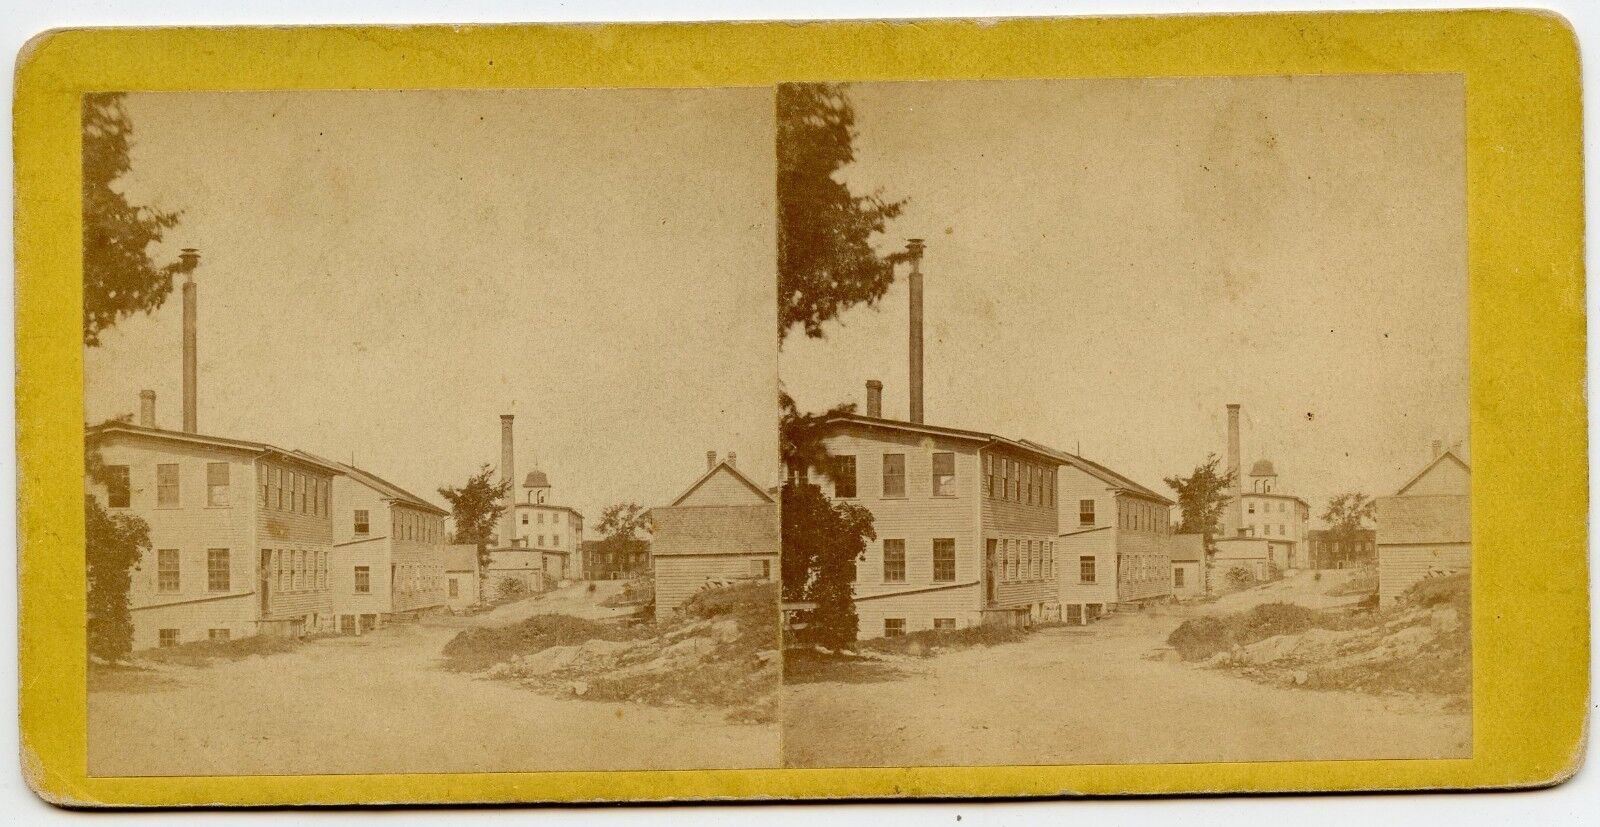 Milford Massachusetts Vintage Stereoview Photo by J.R.Hatch